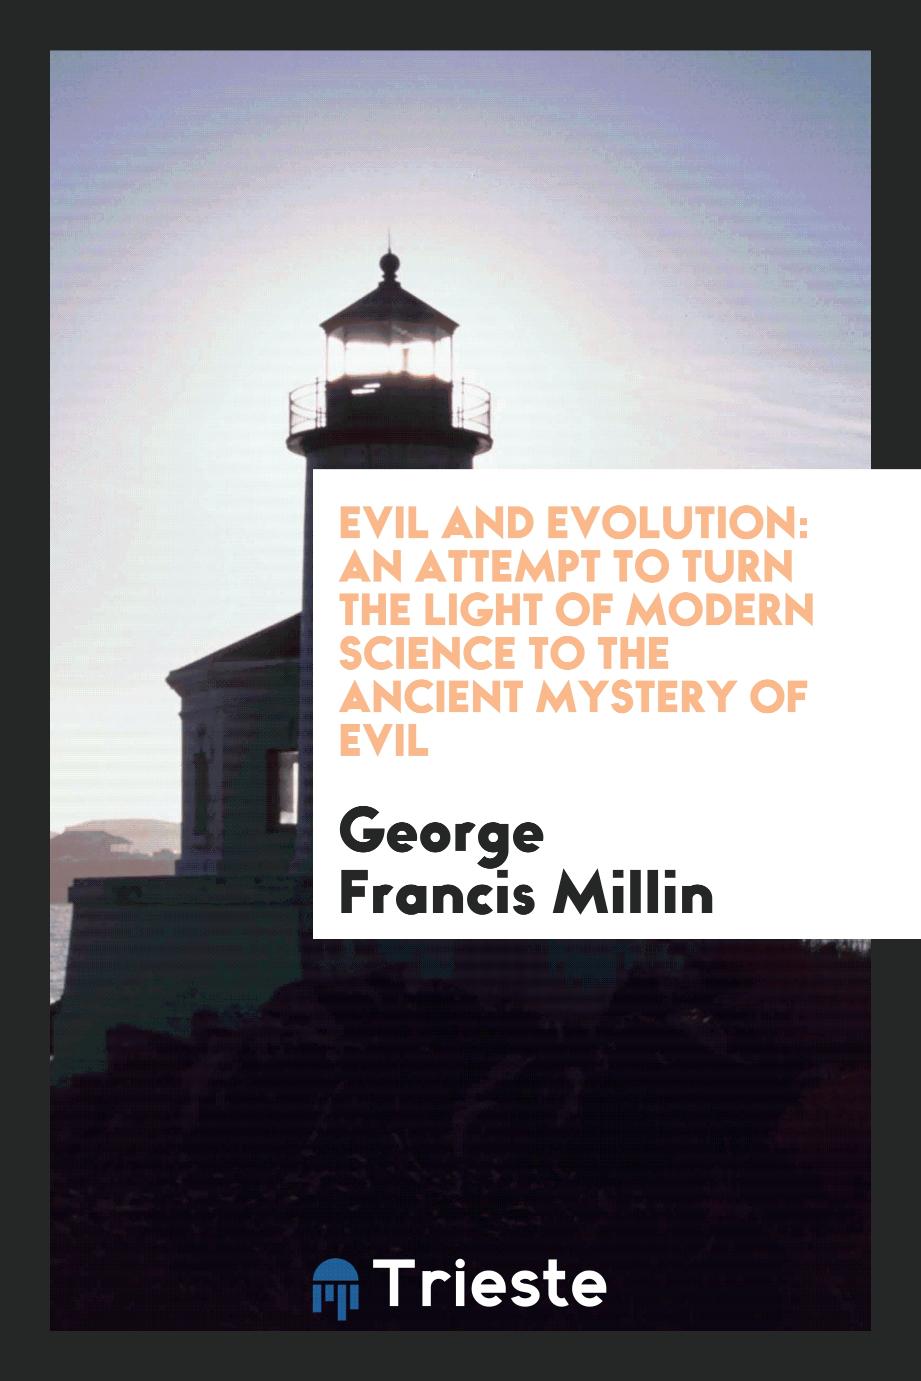 Evil and evolution: an attempt to turn the light of modern science to the ancient mystery of evil